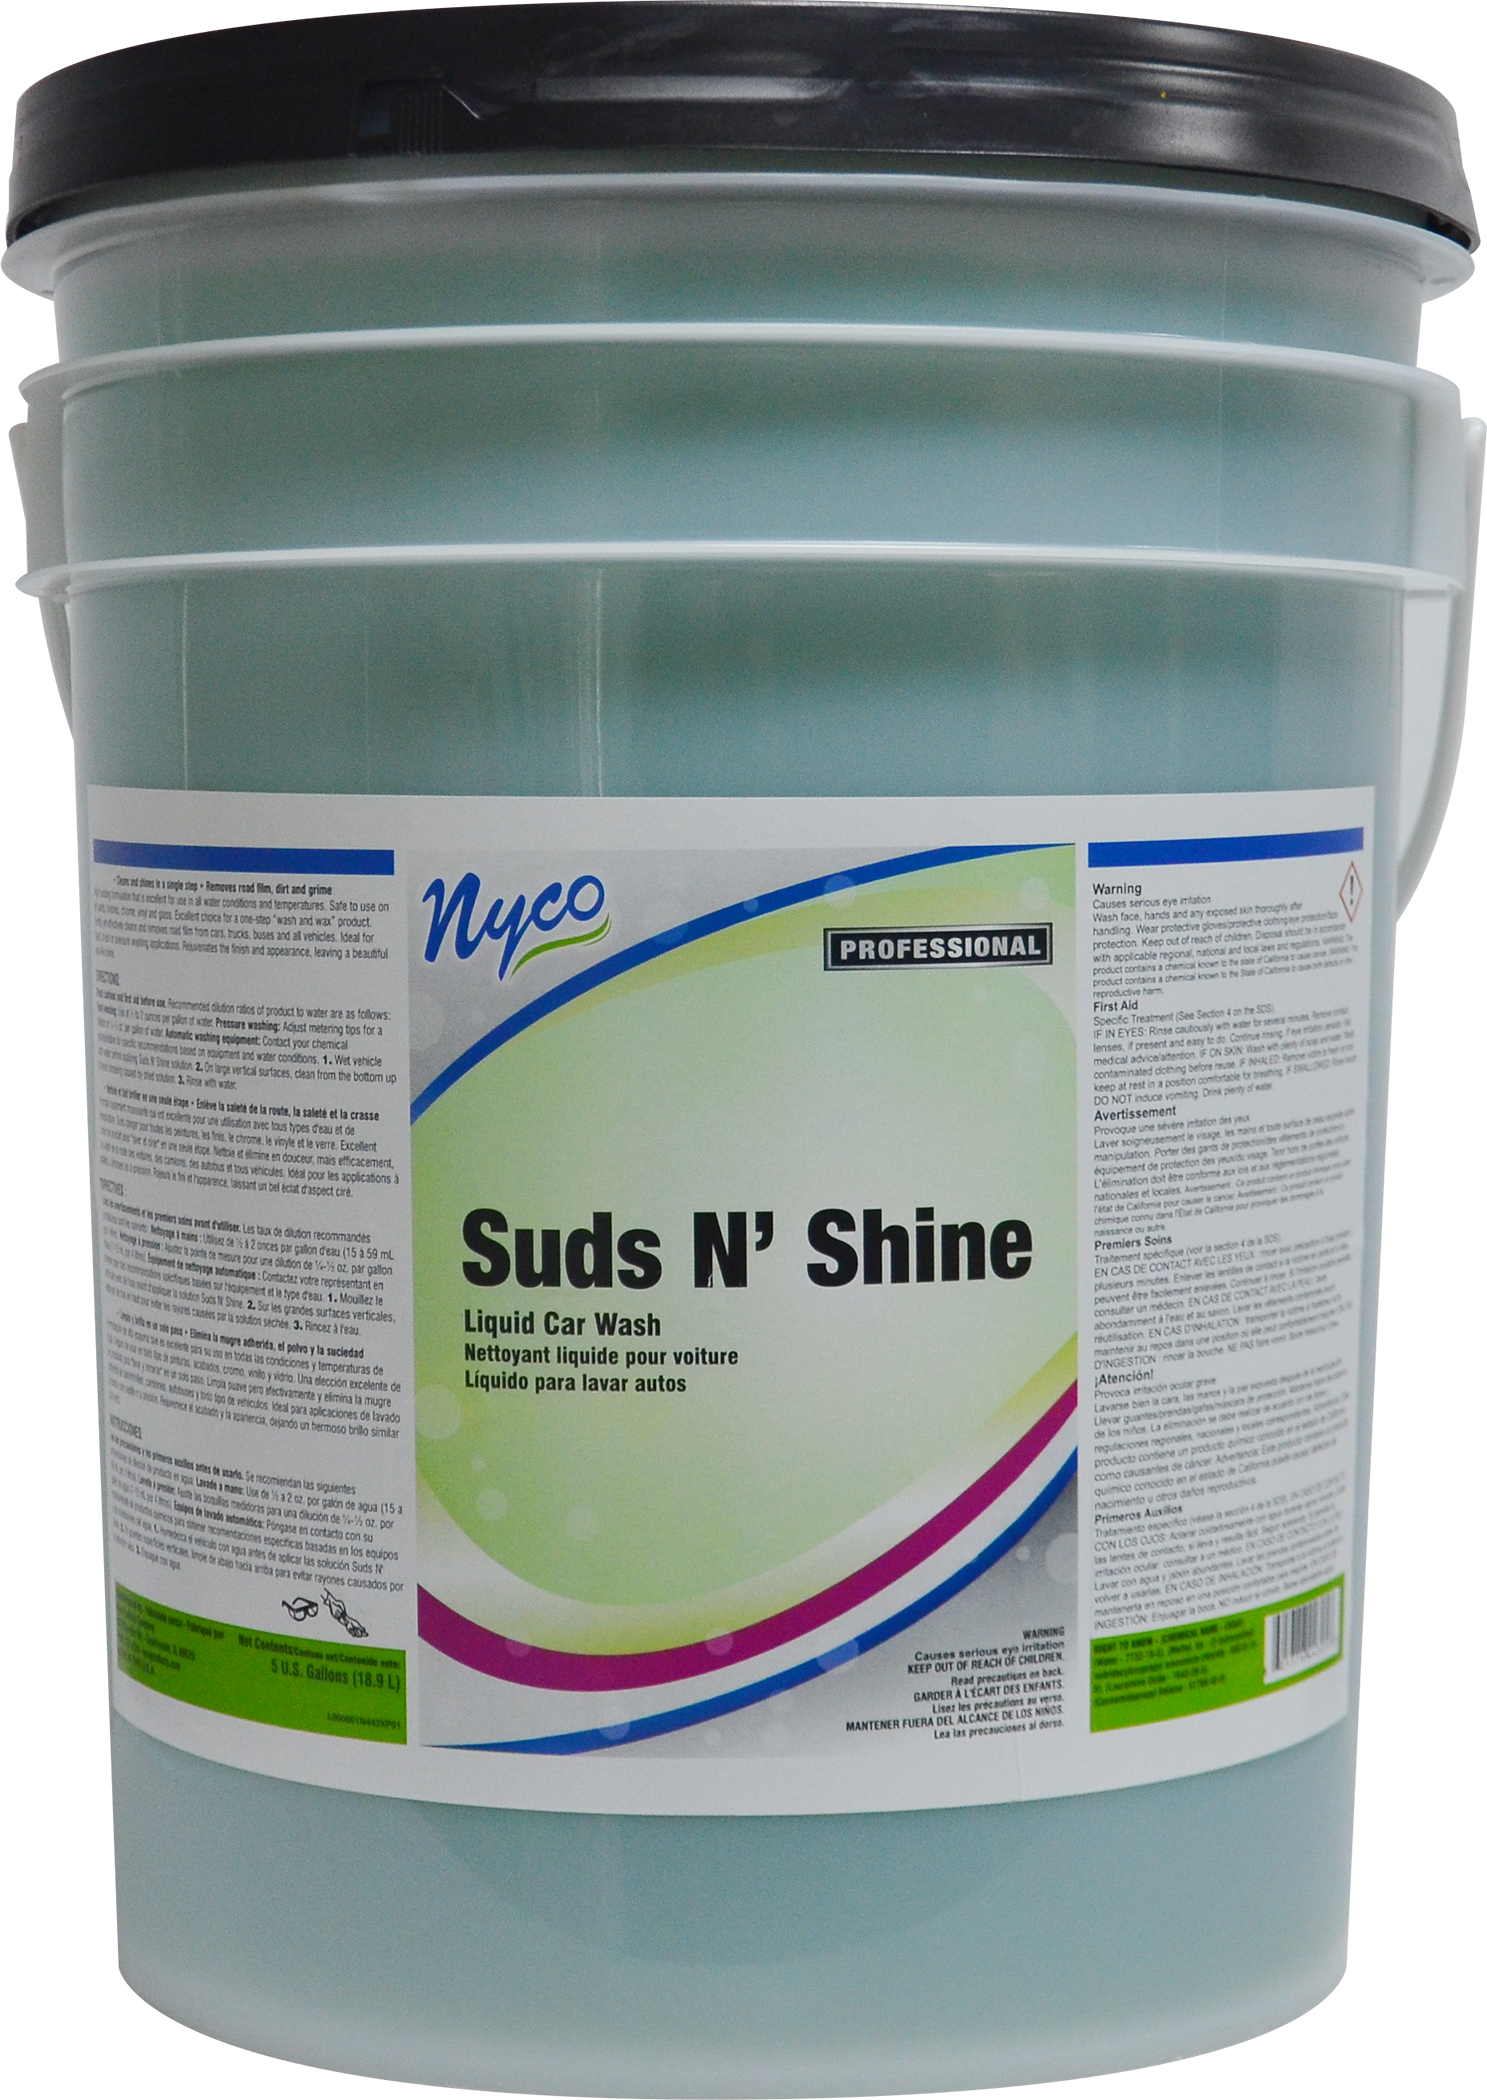 https://www.nycoproducts.com/wp-content/uploads/2016/07/NL443-P5_Suds-N-Shine-1.png